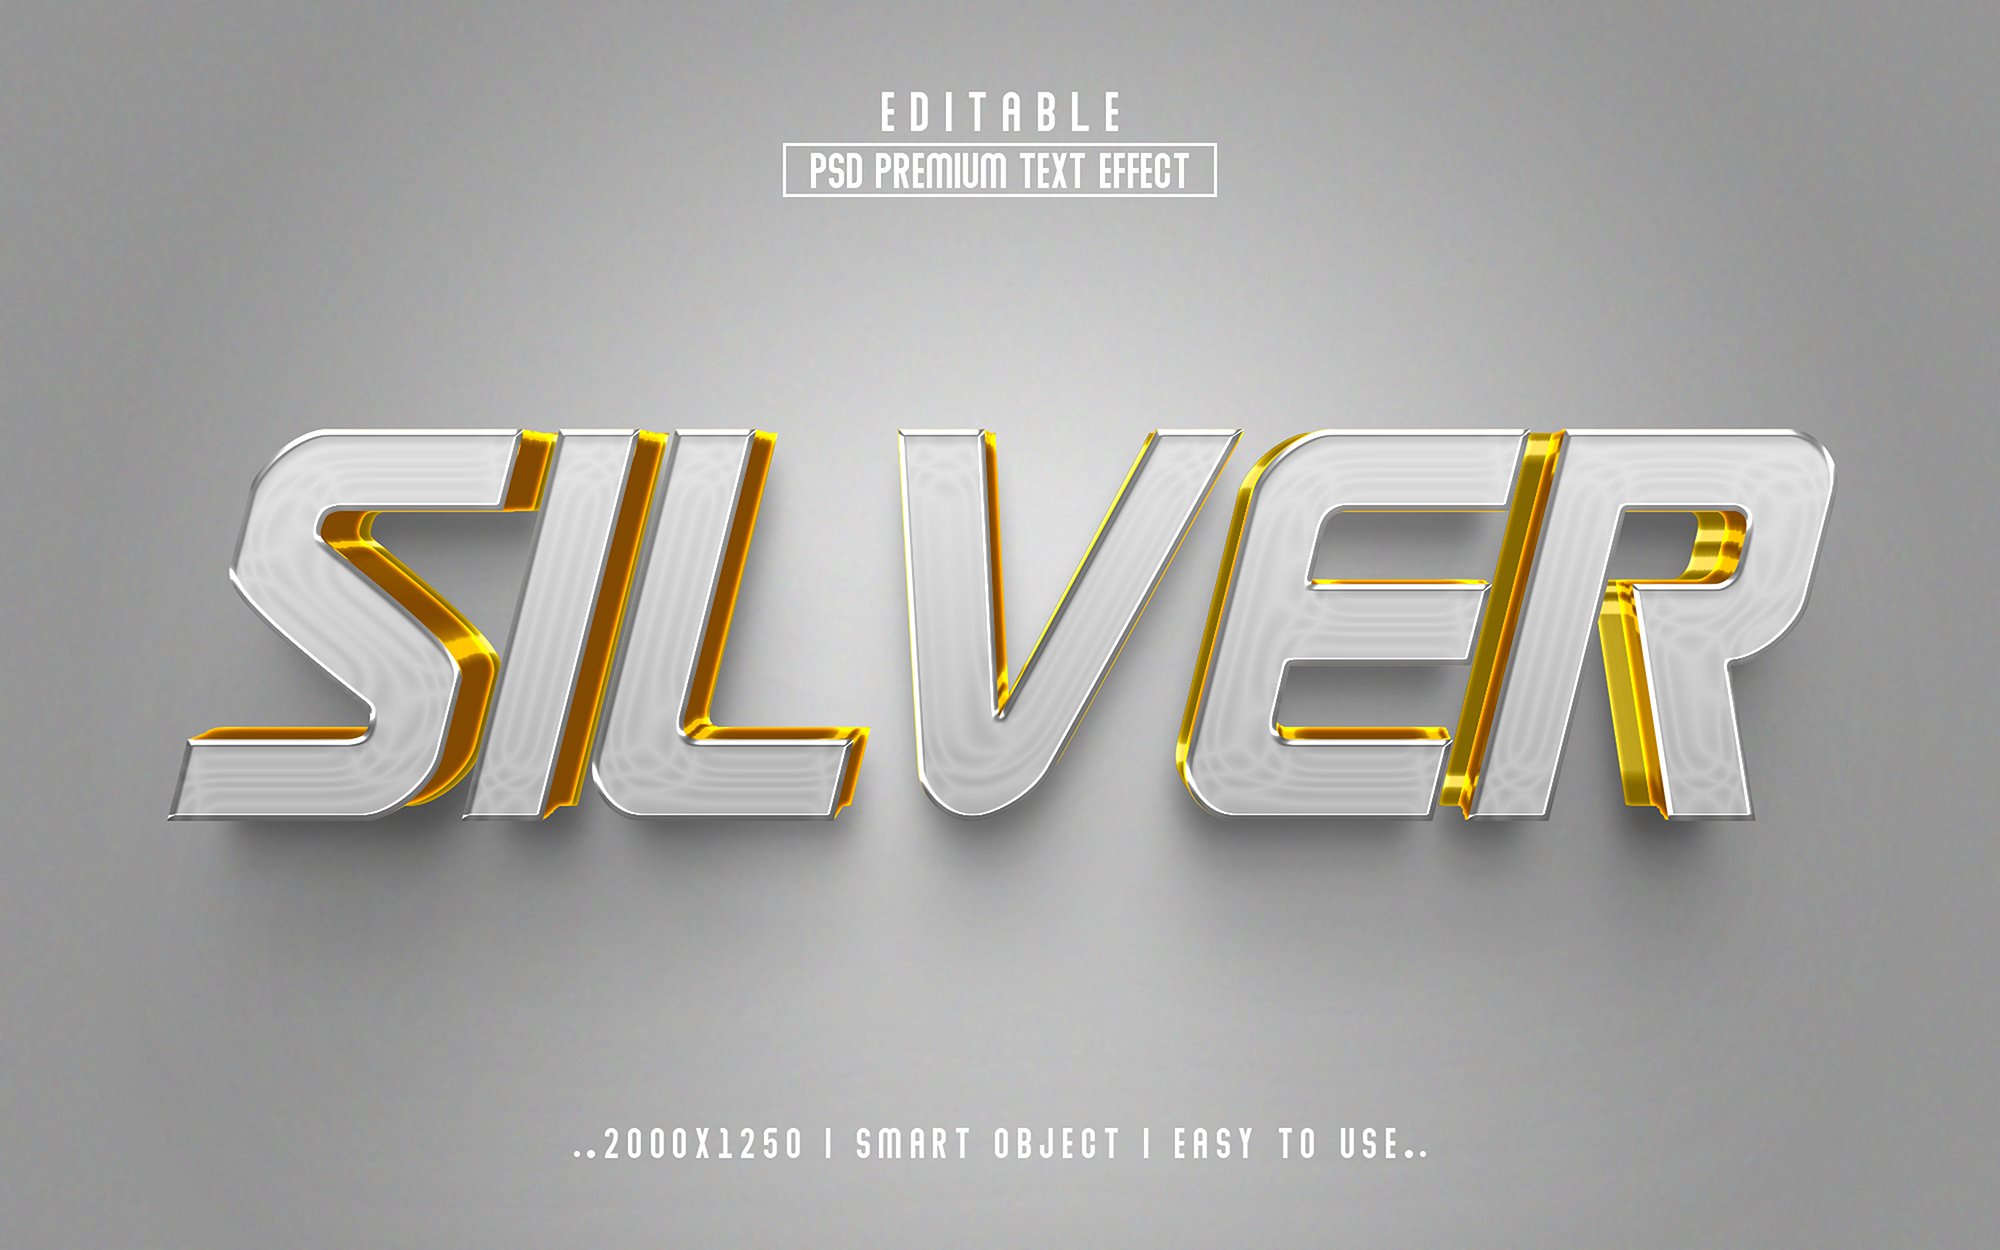 Silver 3D Editable Text Effect stylecover image.